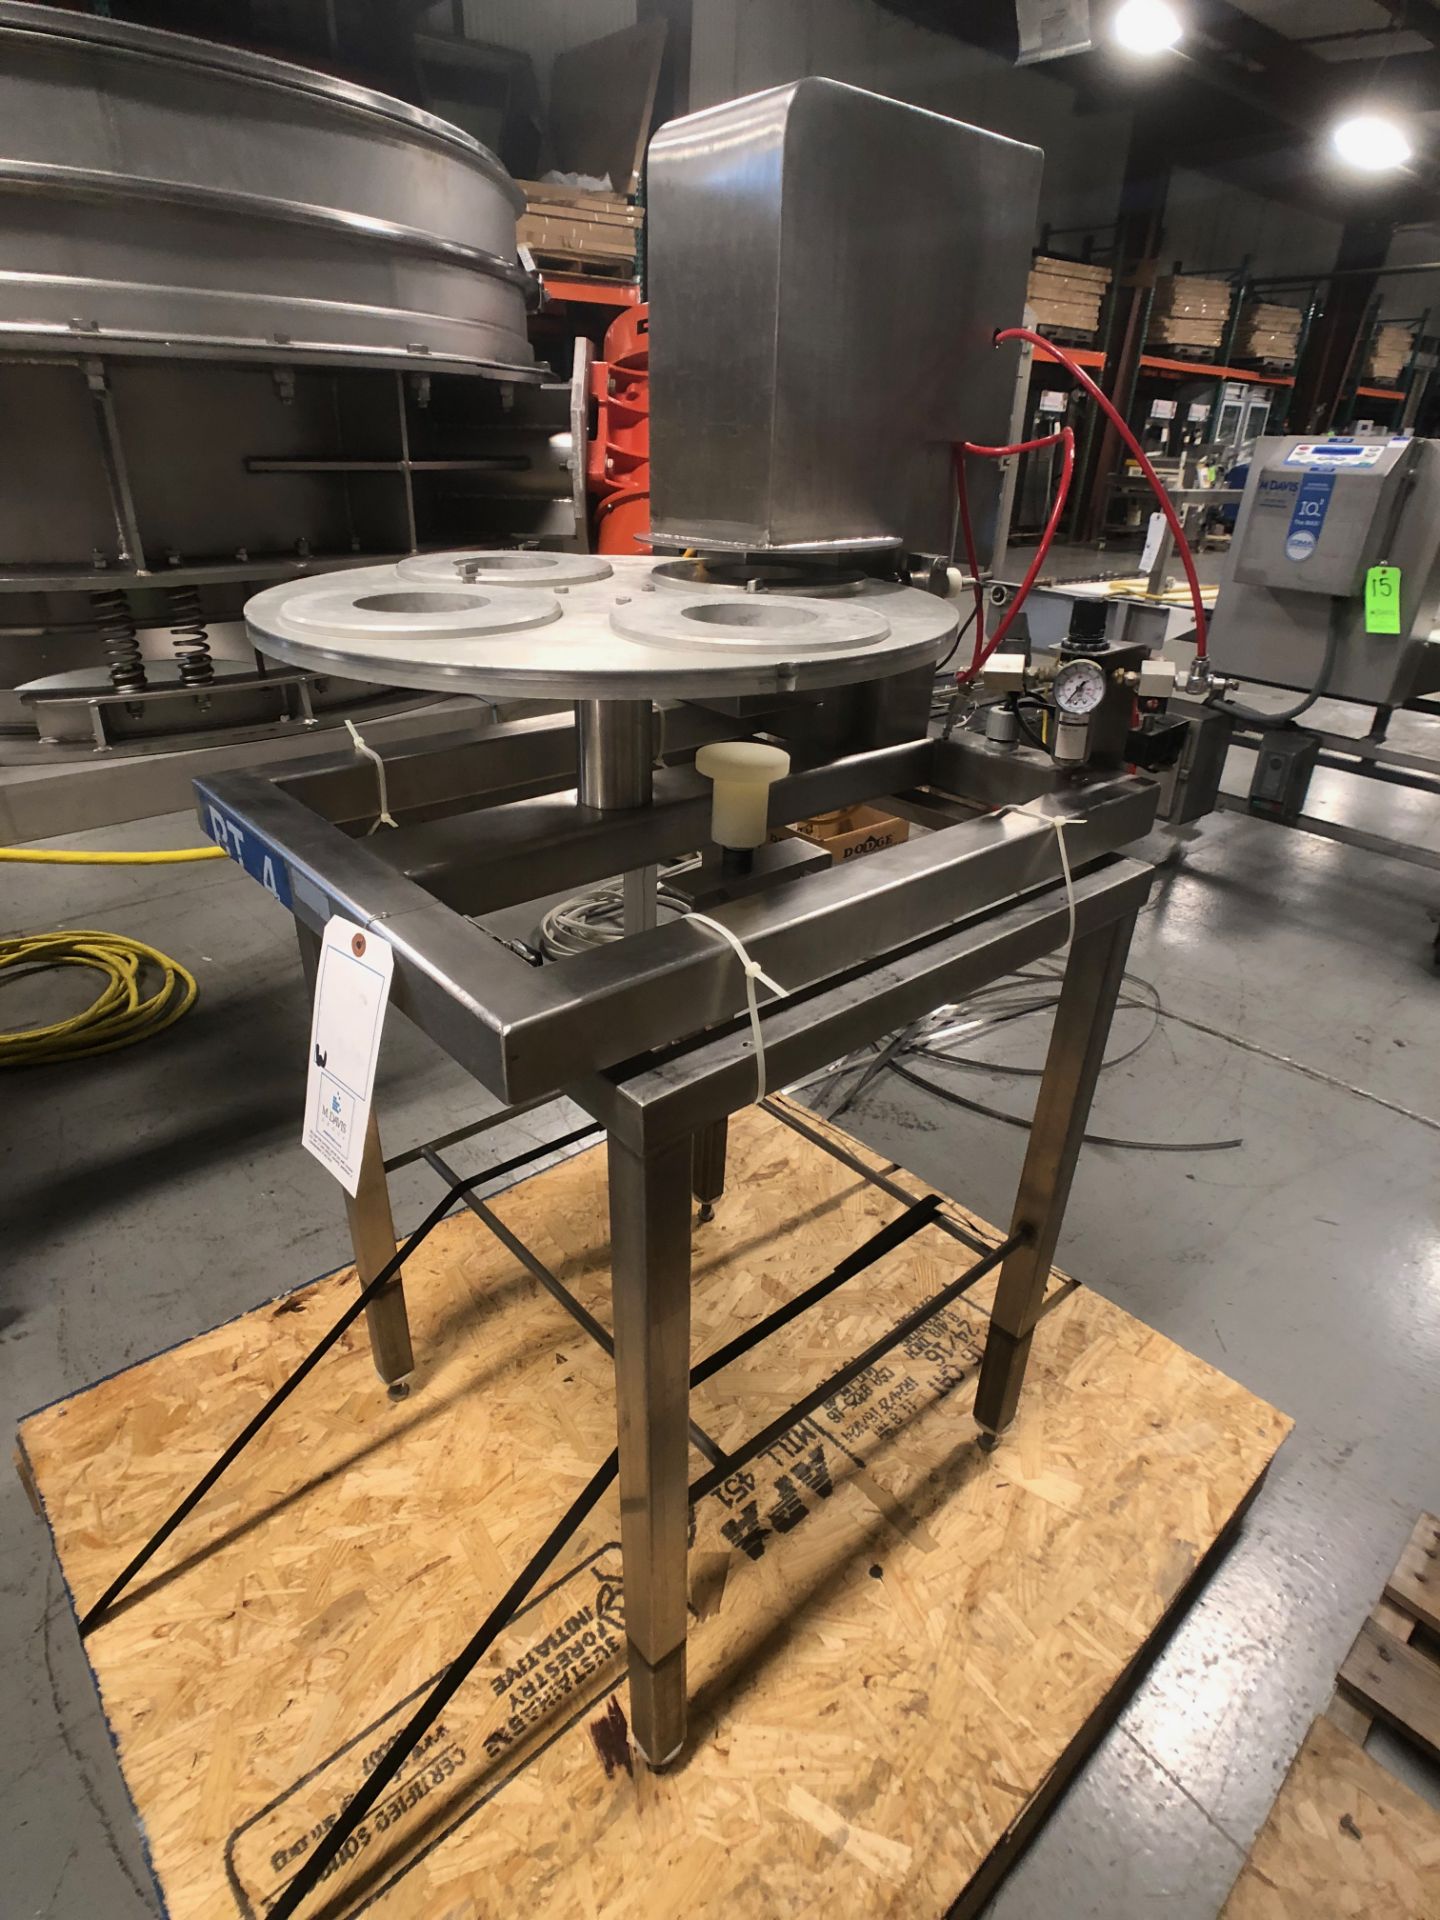 Rotomin Rotary 4-Station Foil Cup Sealer Squire International Systems I, Model MHS4-150, - Image 5 of 14